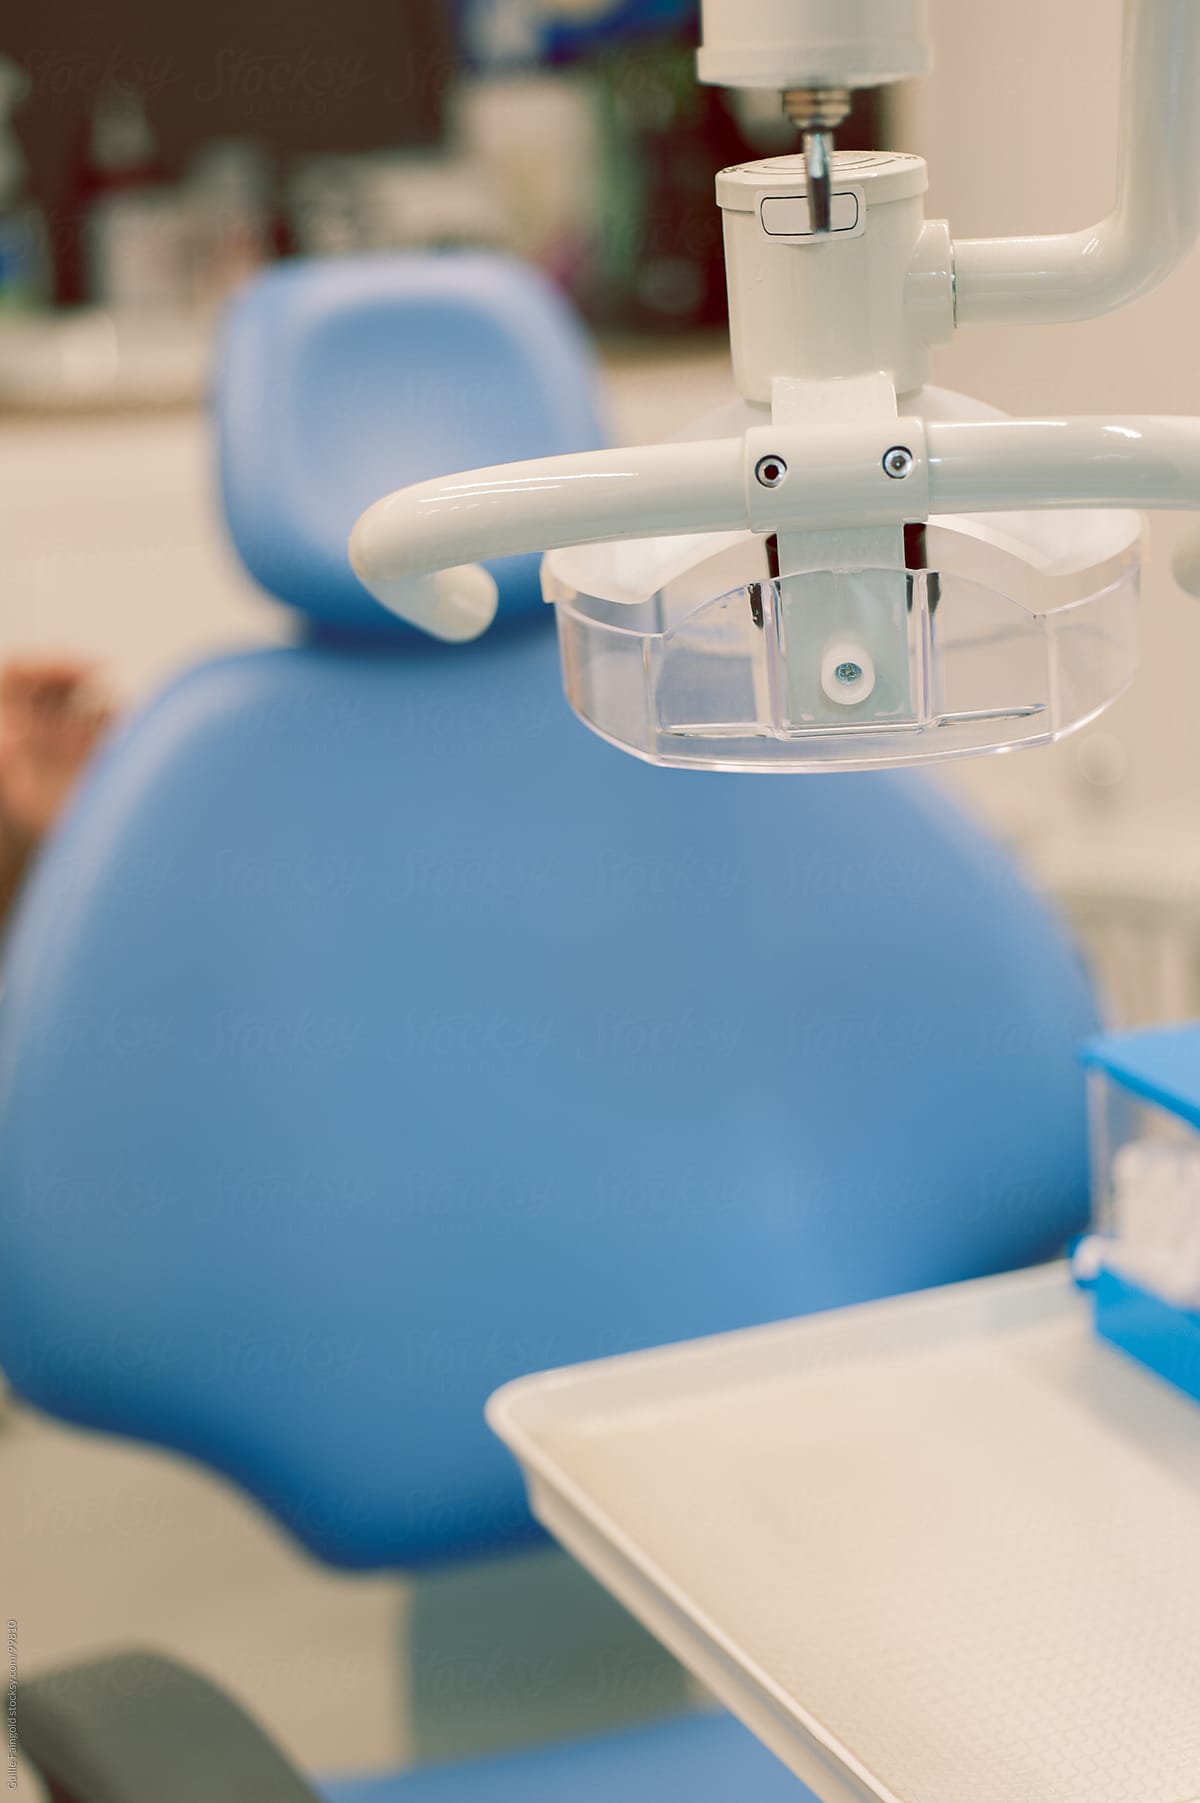 Equipment and dental chair